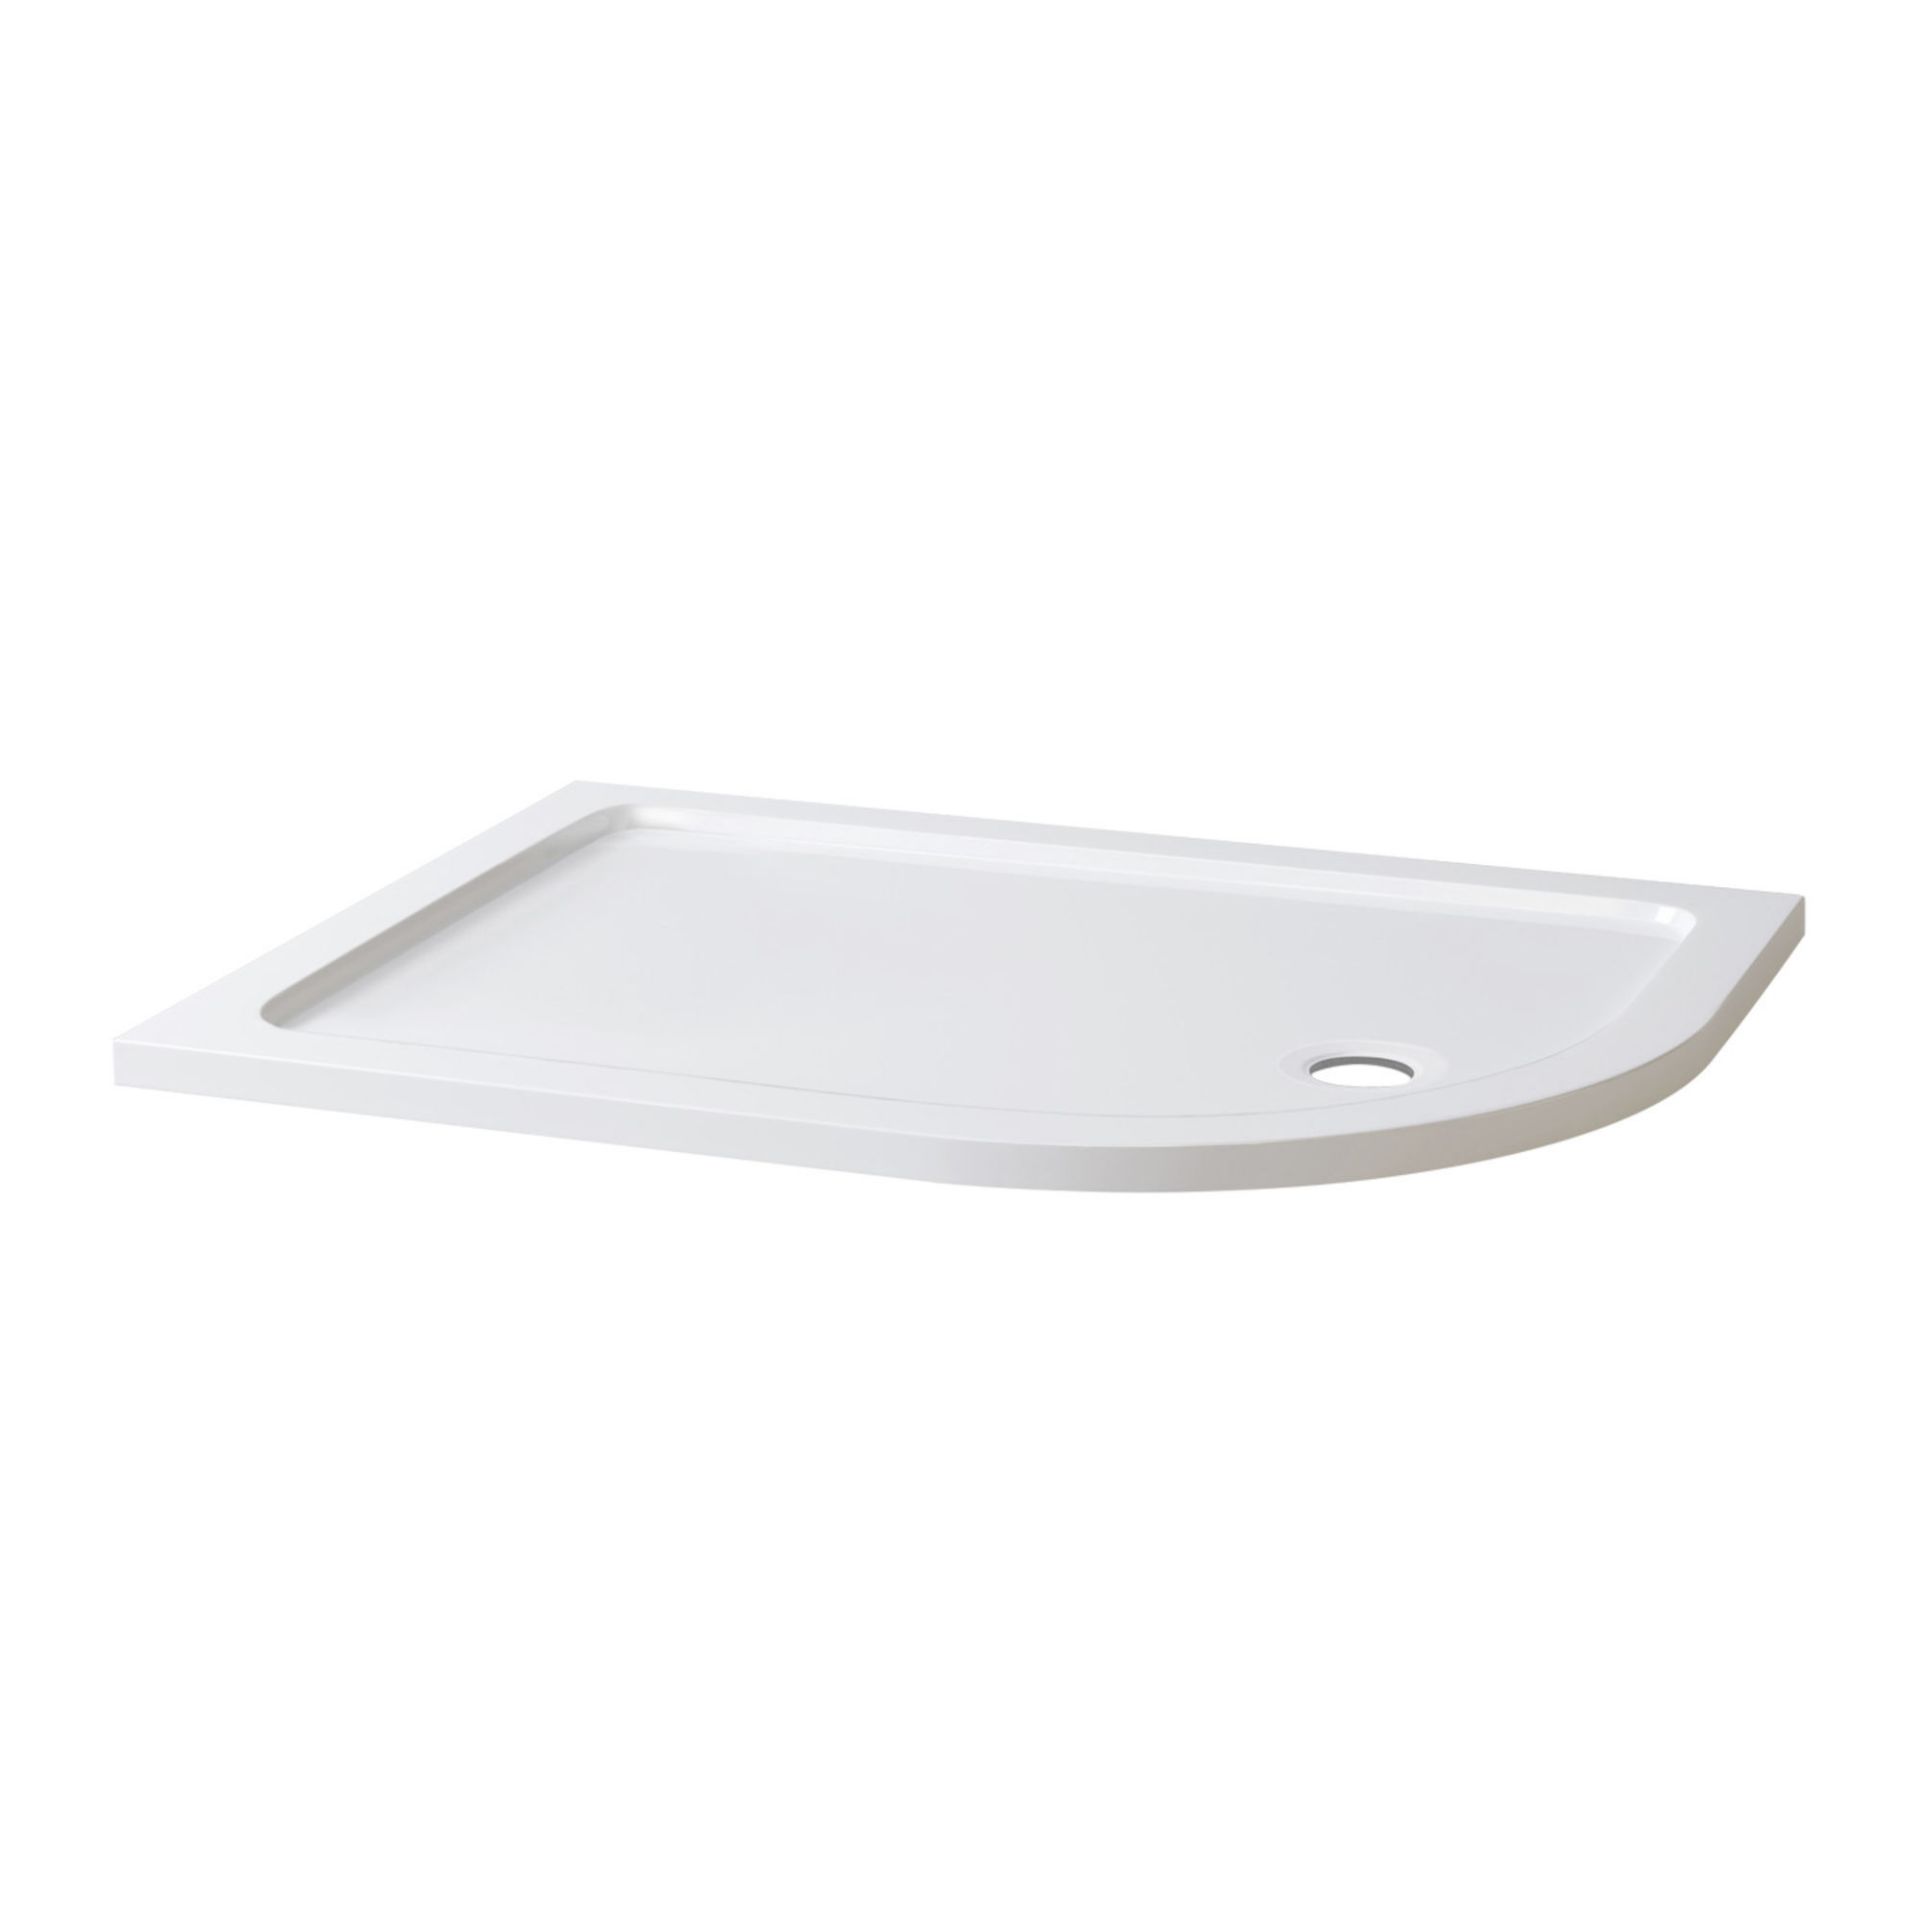 (AD54) 1200x900mm Offset Quadrant Ultra Slim Stone Shower Tray - Right. RRP £234.99. Low profile - Image 2 of 2